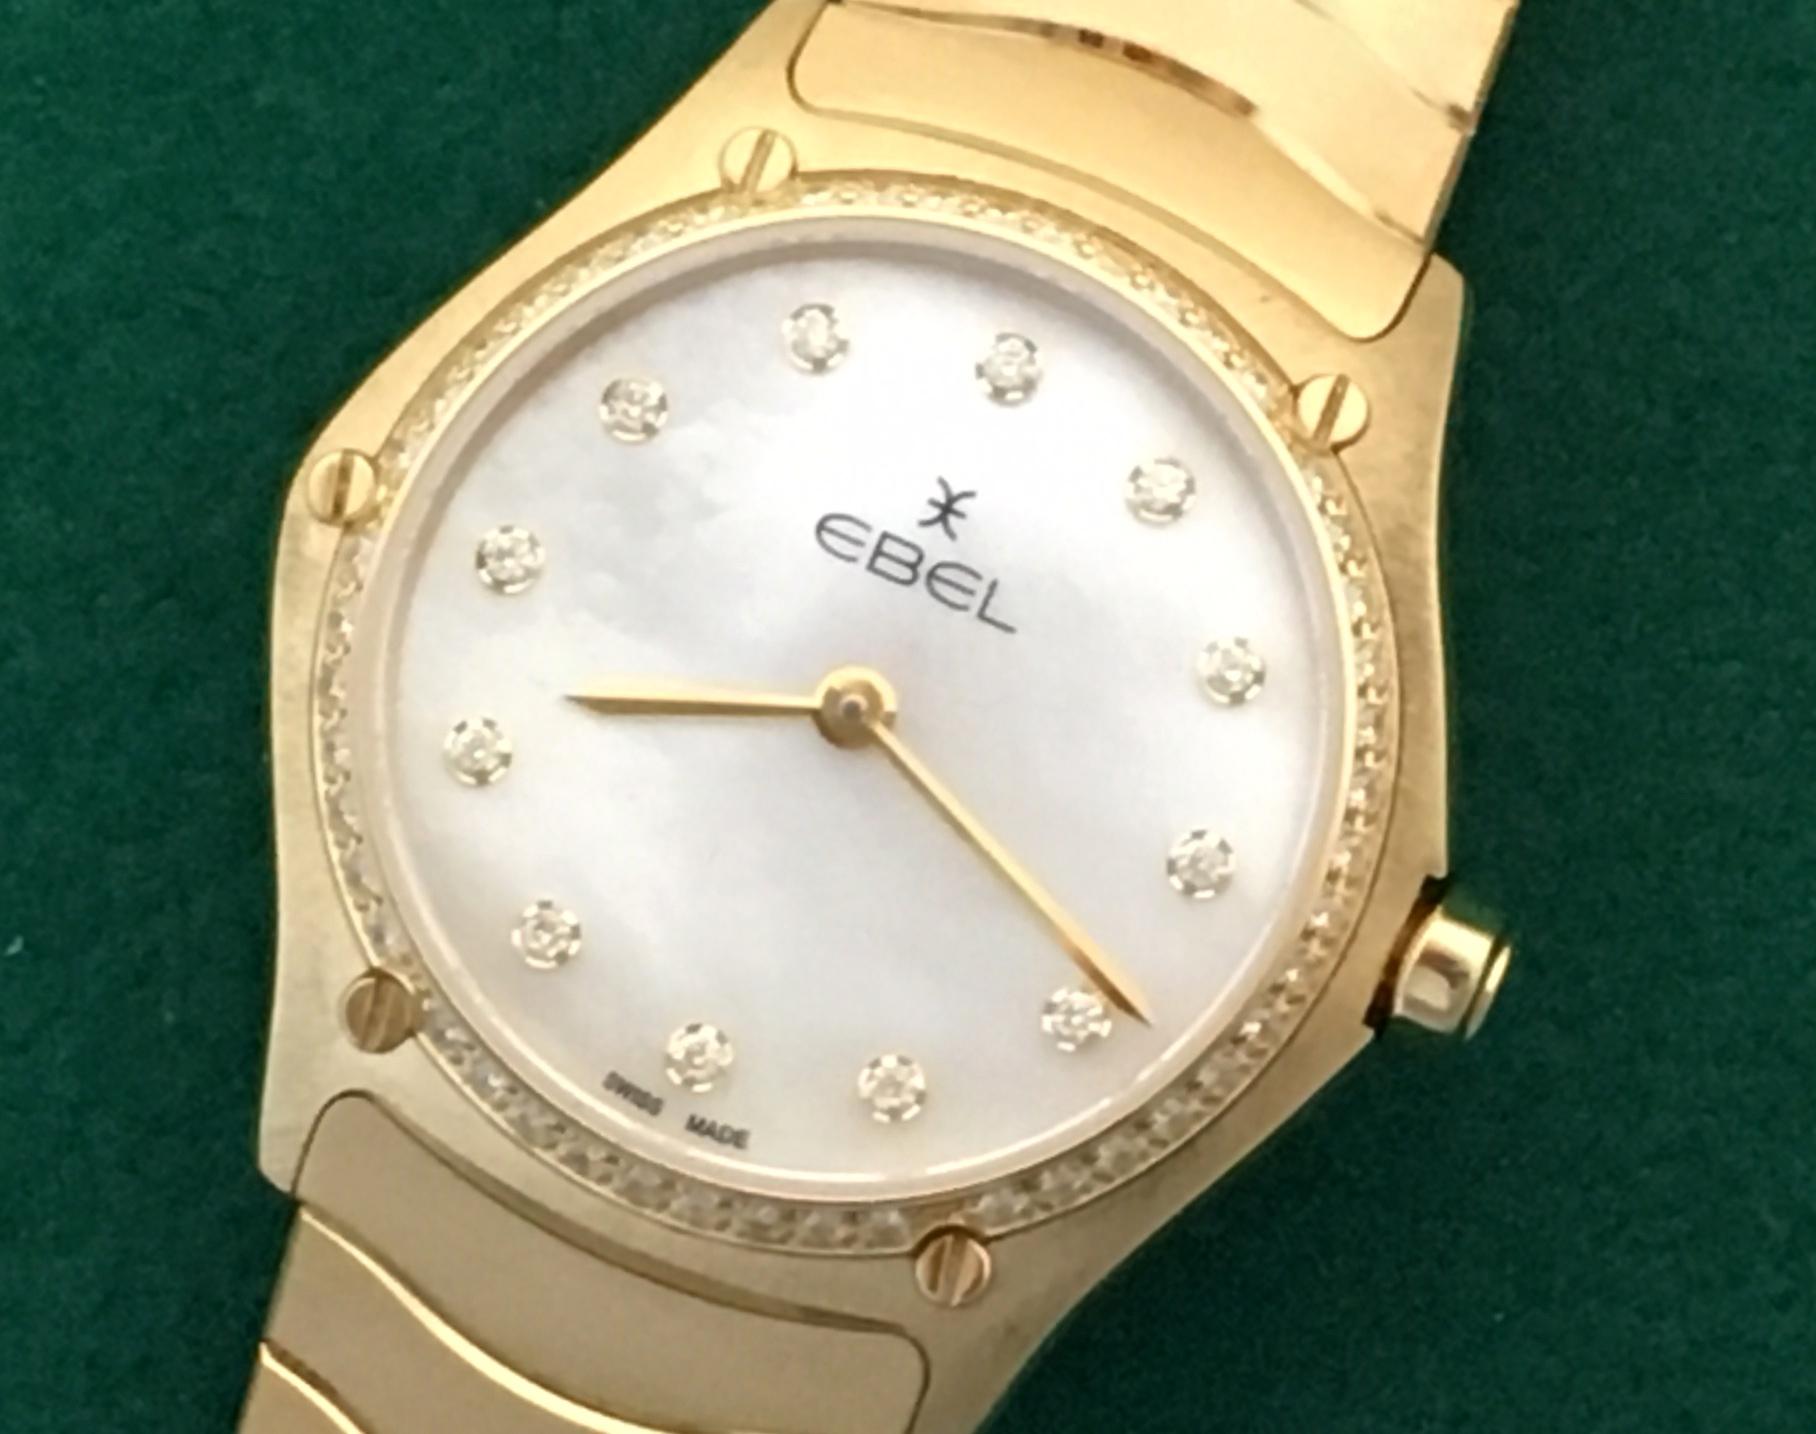 18 Karat Yellow Gold Midsize Ebel Sport Classic Women’s Watch 05.3.50.1096 In Excellent Condition For Sale In Dallas, TX